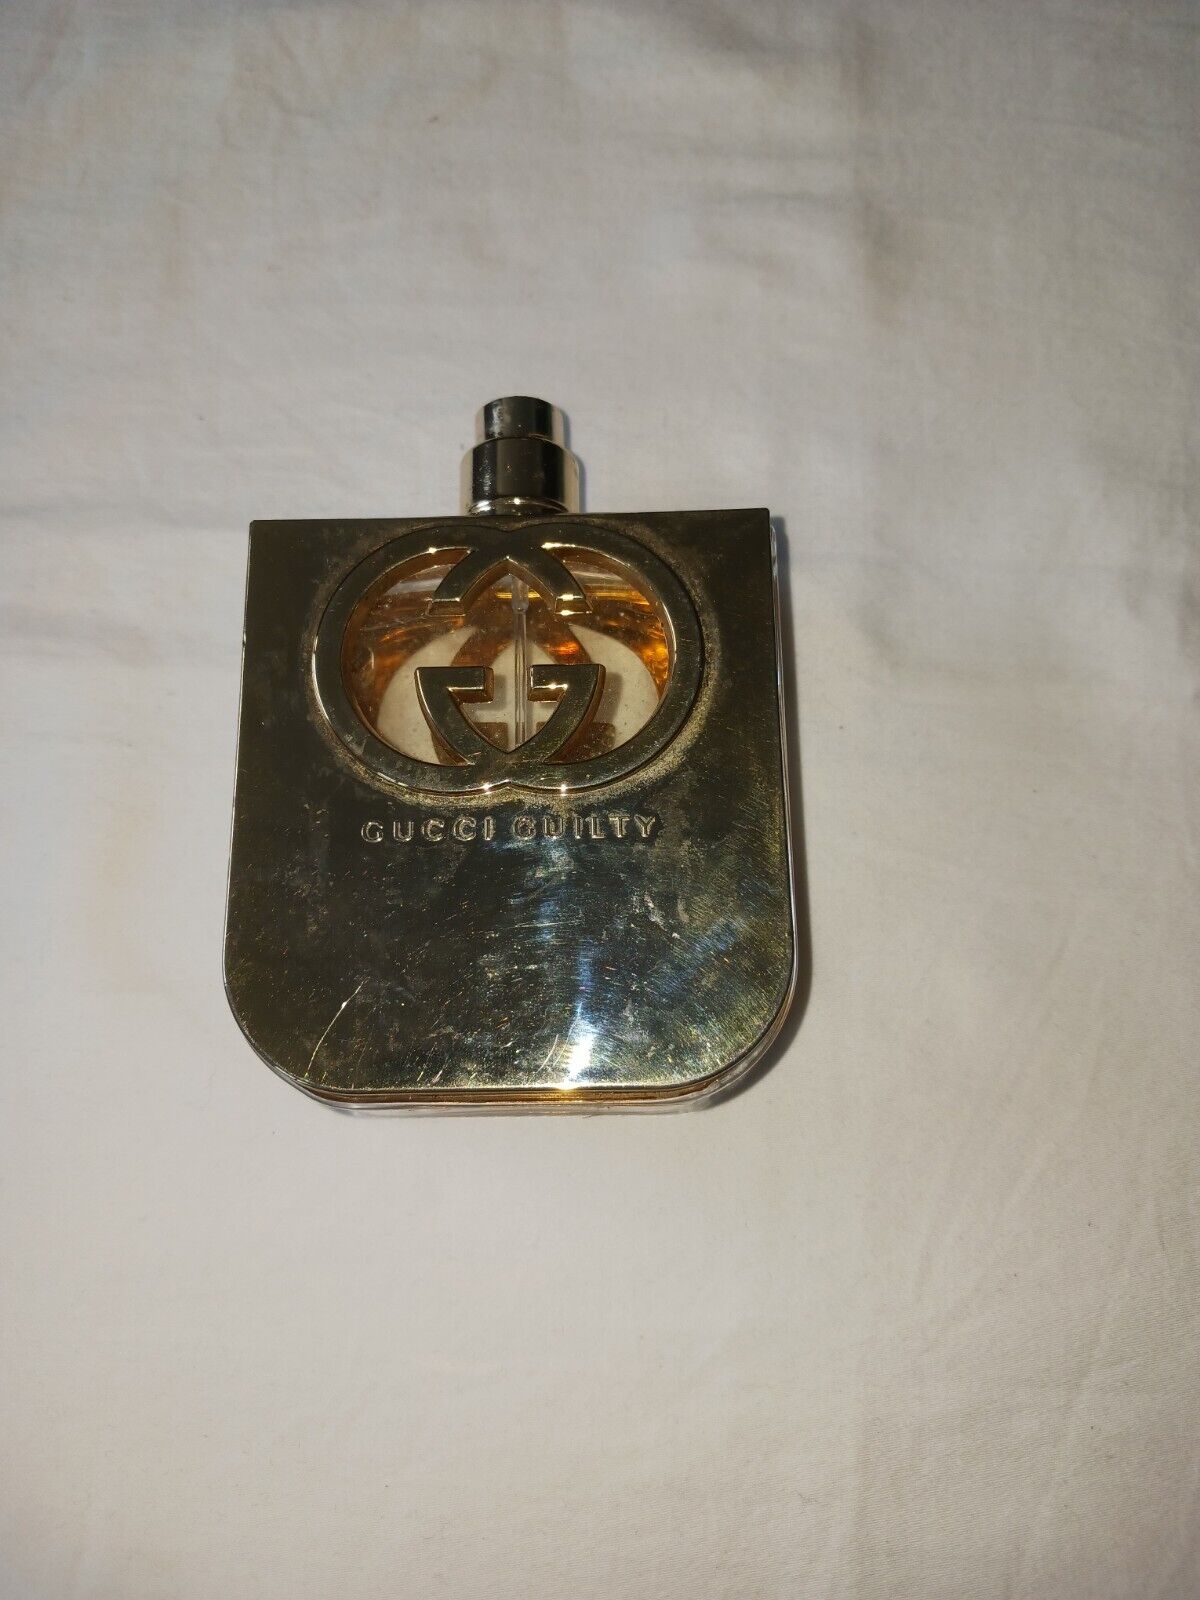 Vintage Gucci Guilty Women's EDT Spray 2.5 oz Perfume 1/4 Full 